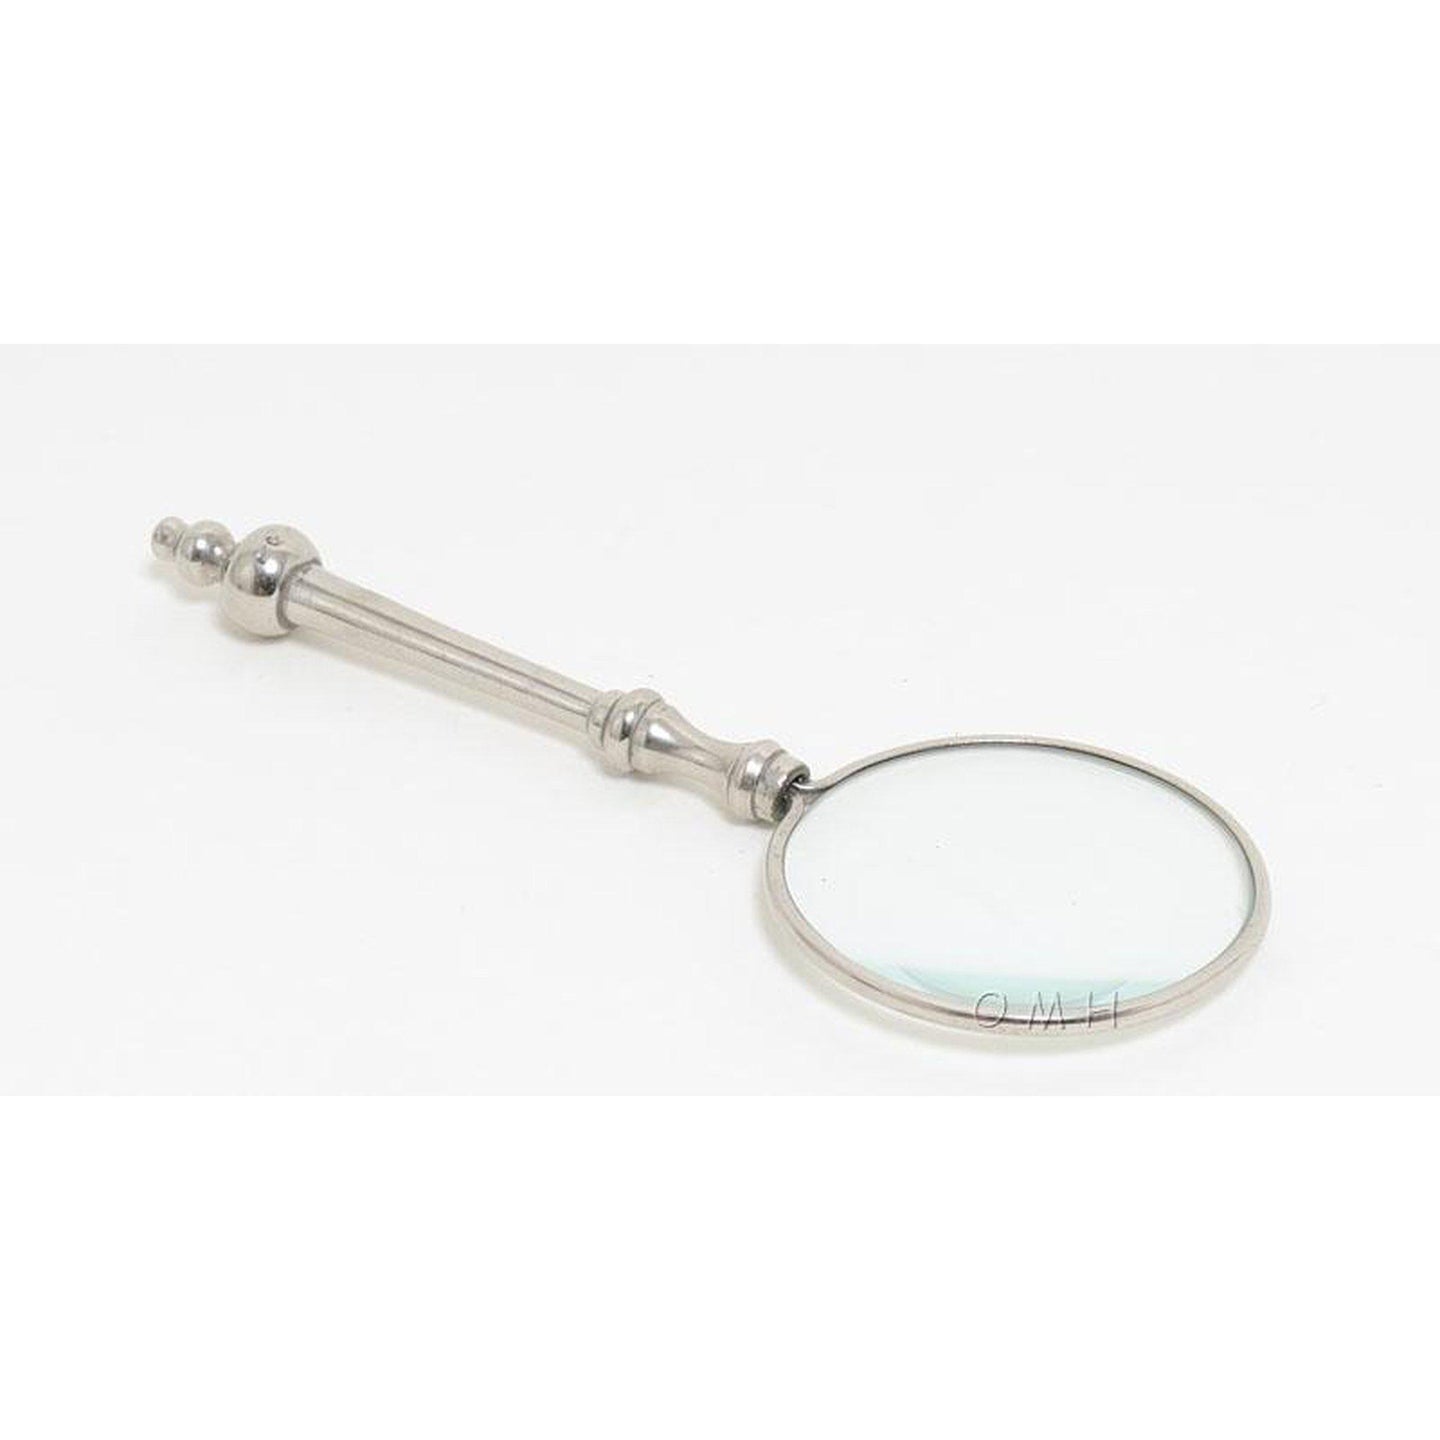 Old Modern Magnifier in wood box- 2 inches ND039